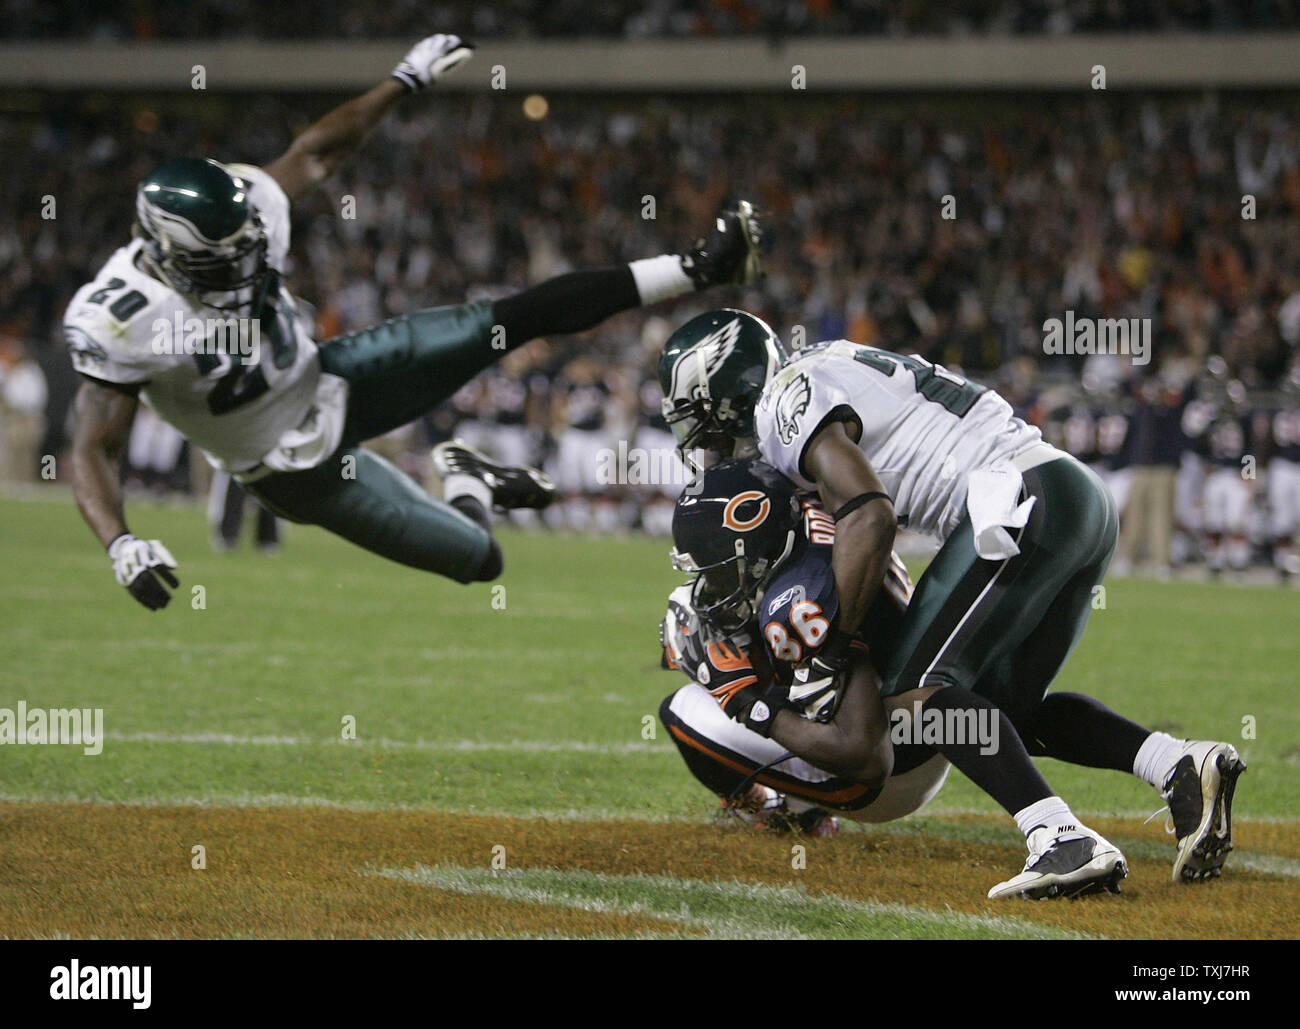 Chicago Bears receiver Marty Booker (C) hauls in a 22-yard touchdown reception as Philadelphia Eagles safeties Brian Dawkins (L) and Quintin Mikell defend during the second quarter on September 28, 2008 at Soldier Field in Chicago. (UPI Photo/Brian Kersey) Stock Photo